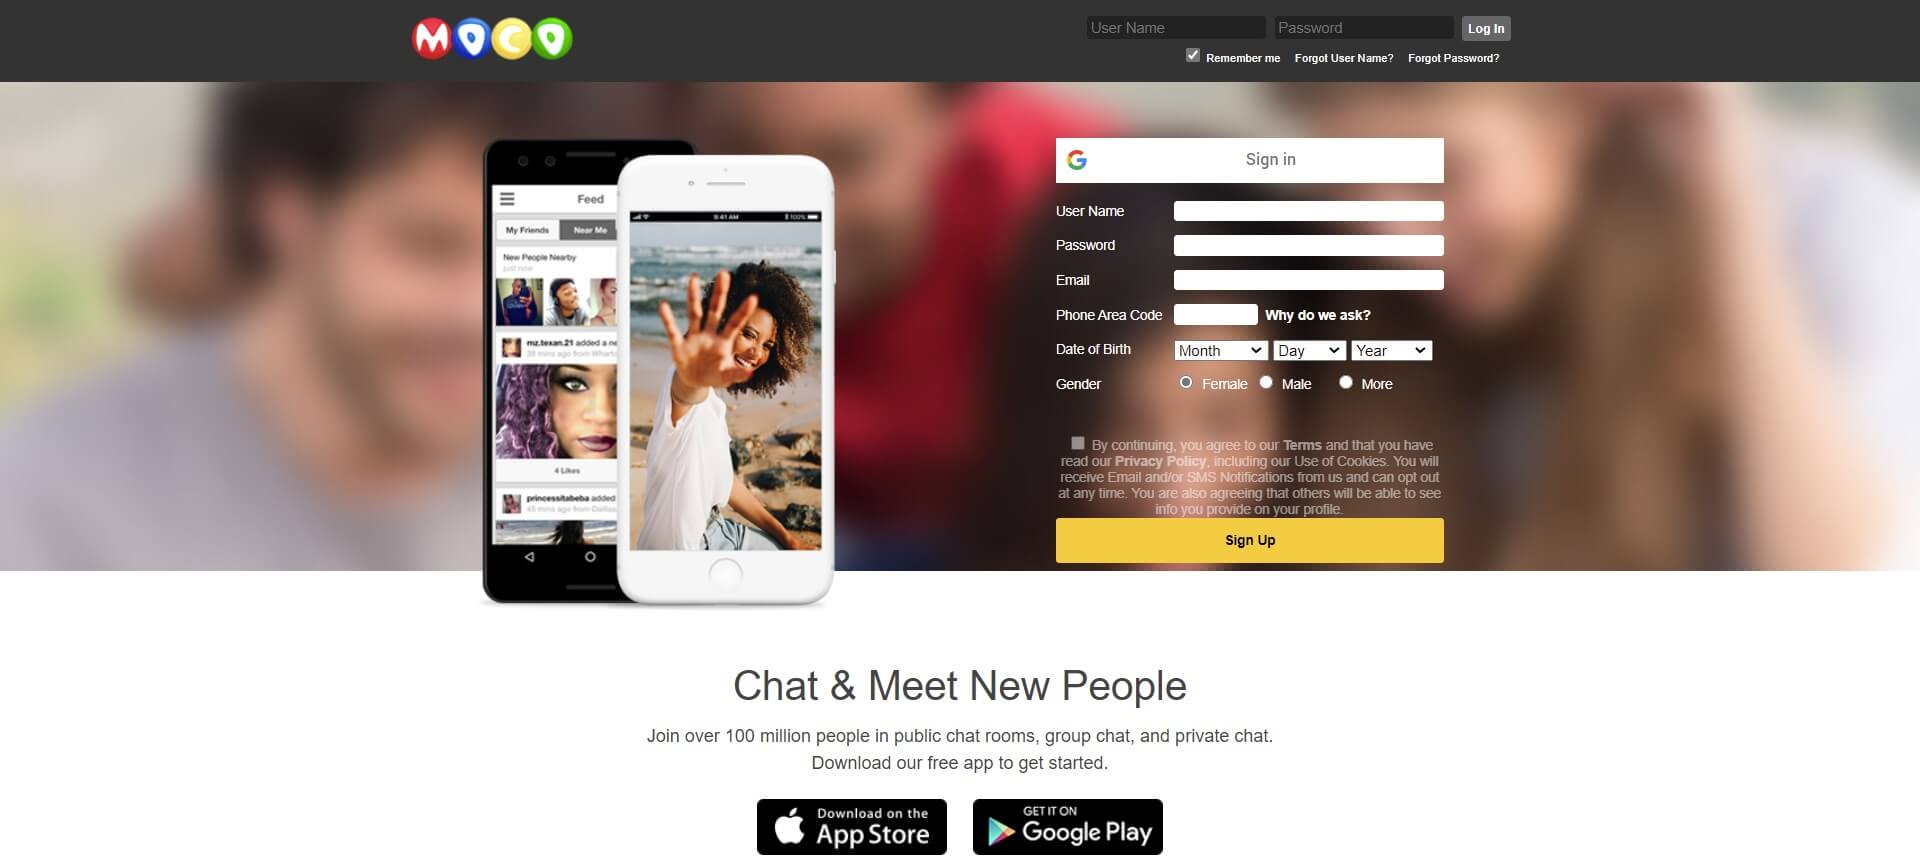 best video chat apps, best chat apps, best chatting apps, best video chat apps with strangers,best group chat apps, best anonymous chat apps, best app to chat with strangers, best random video chat app, best chat room apps, best random chat apps, best live chat apps, best video chat app for android, best group video chat apps, best video chat app for groups, best free chat apps, best free video chat app, best nearby chat app, best private chat app, best chat app for android, best private chat apps, best team chat app, best live video chat app, best video chat app for iPhone